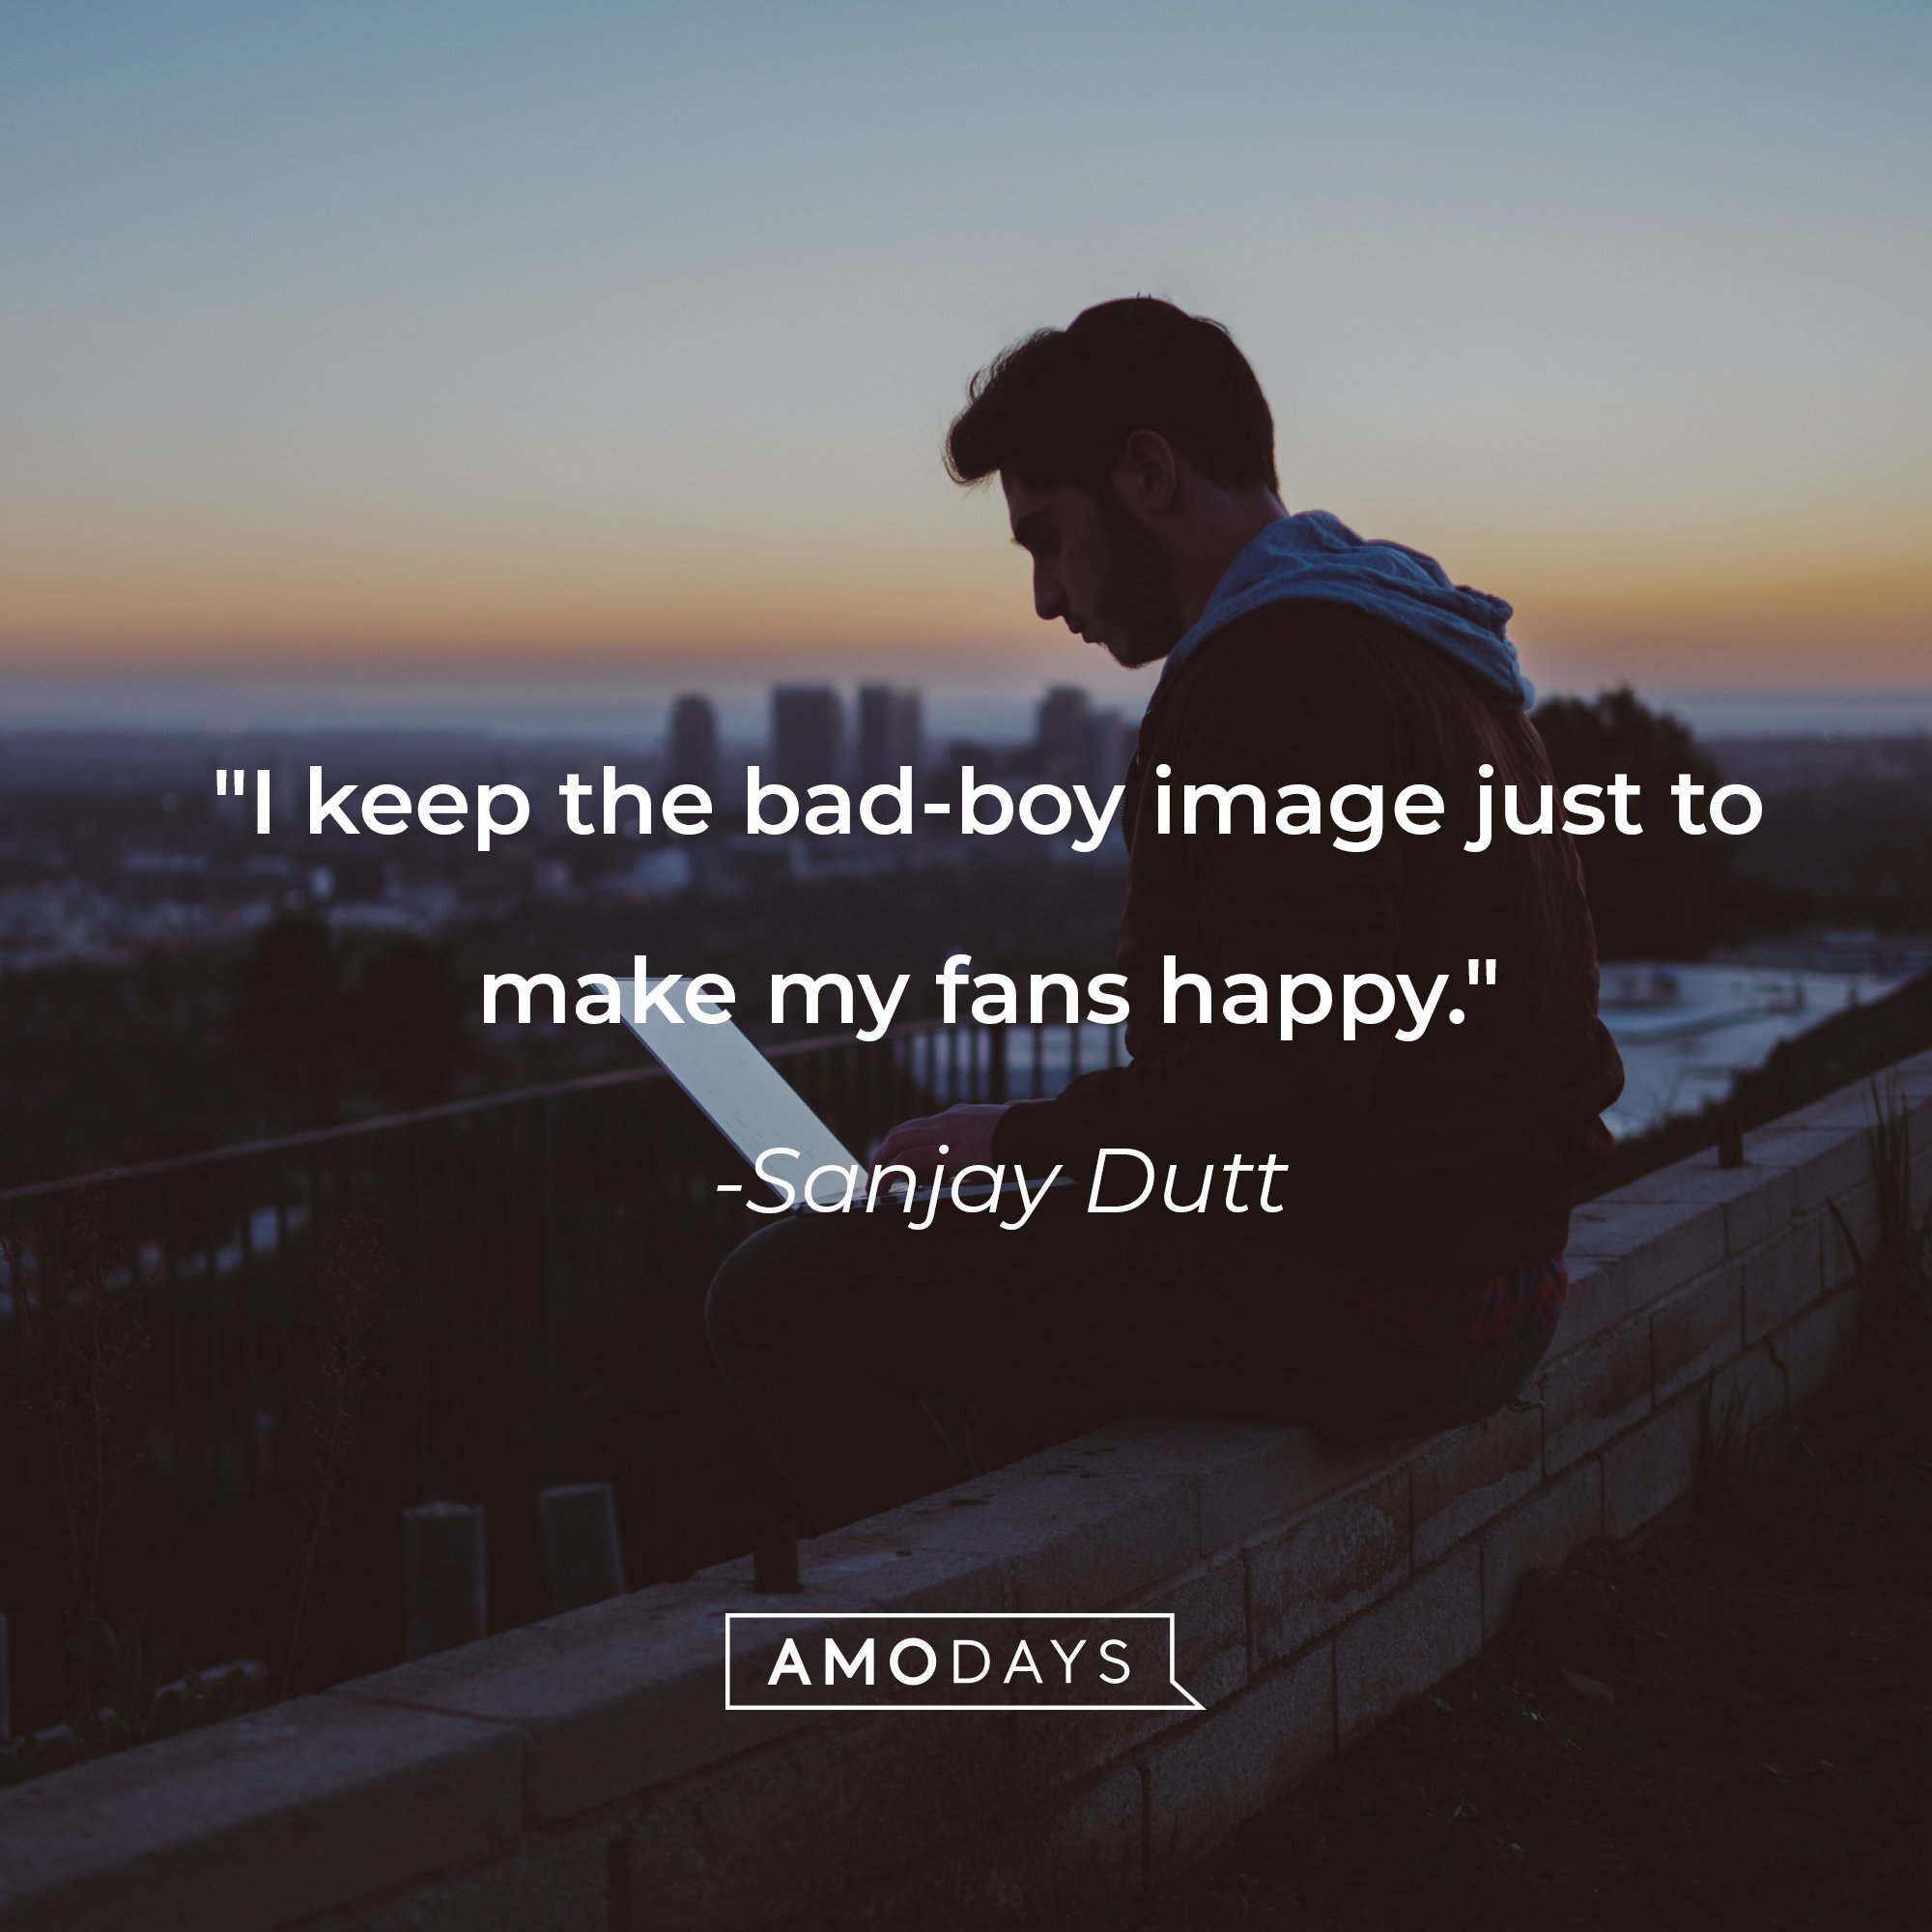 Sanjay Dutt's quote: "I keep the bad-boy image just to make my fans happy." | Image: AmoDays